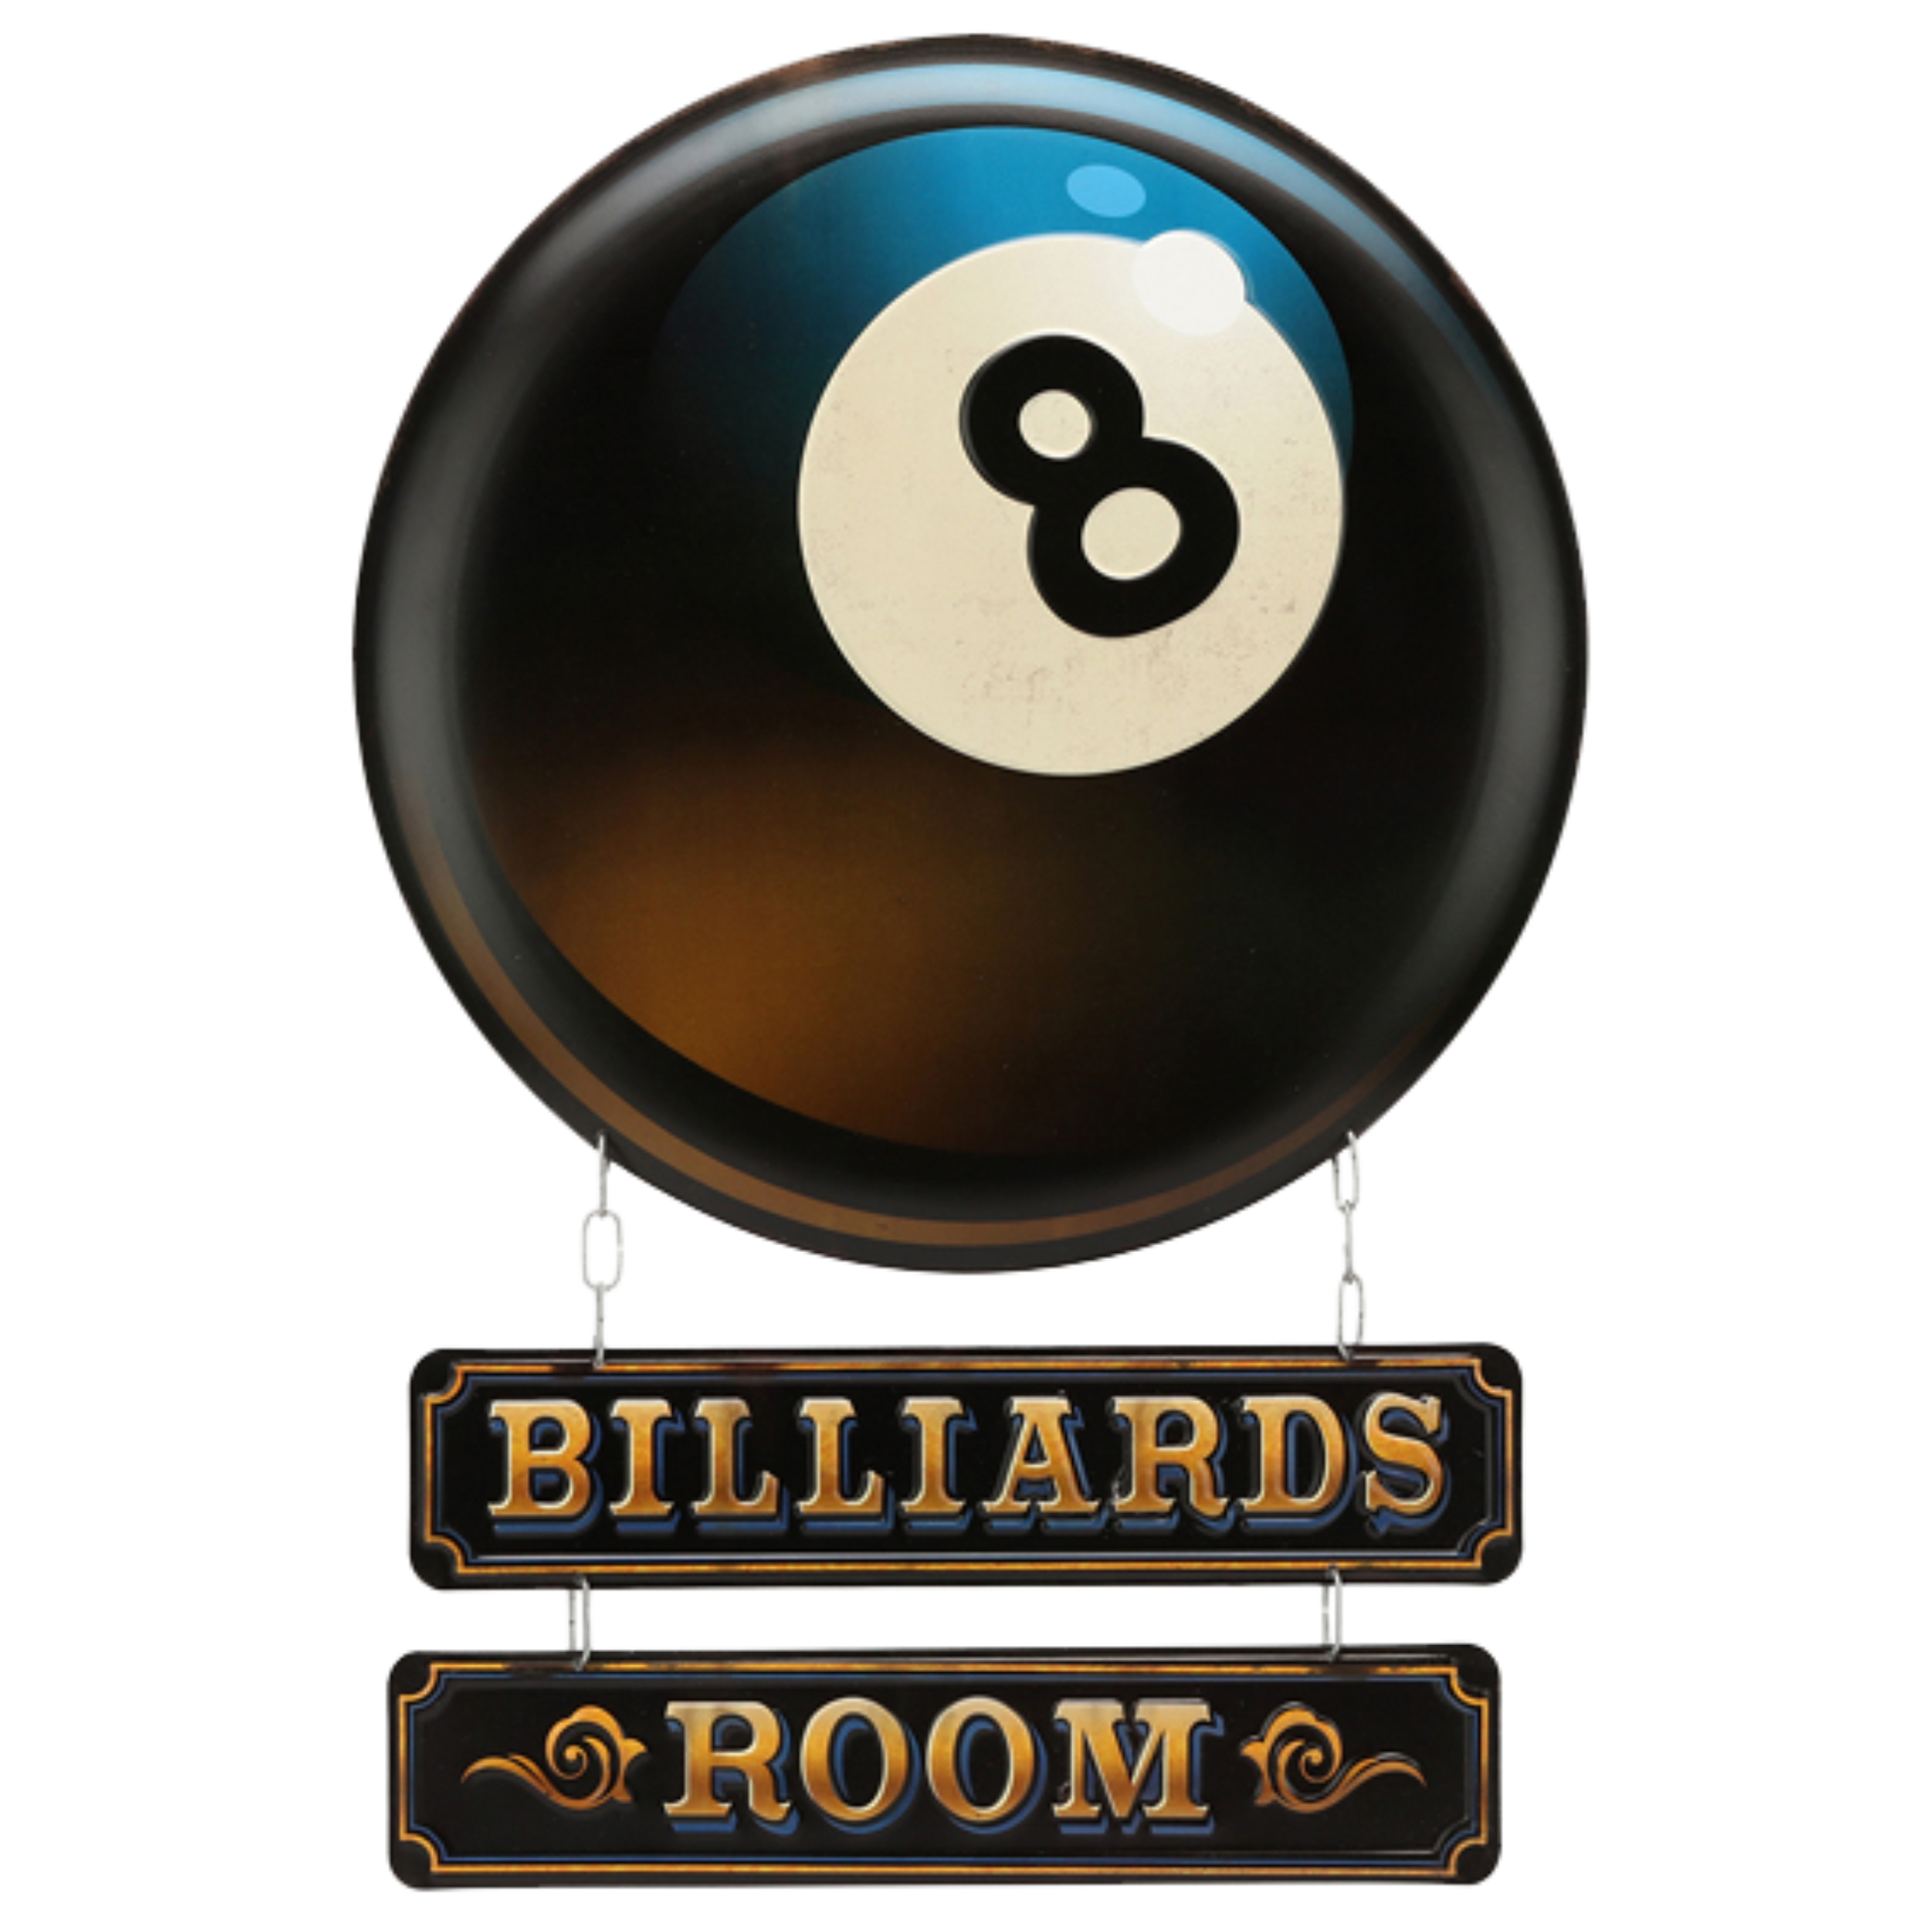 Glossy 8-ball image with hanging "Billiards Room" lettering in gold on a black backdrop.